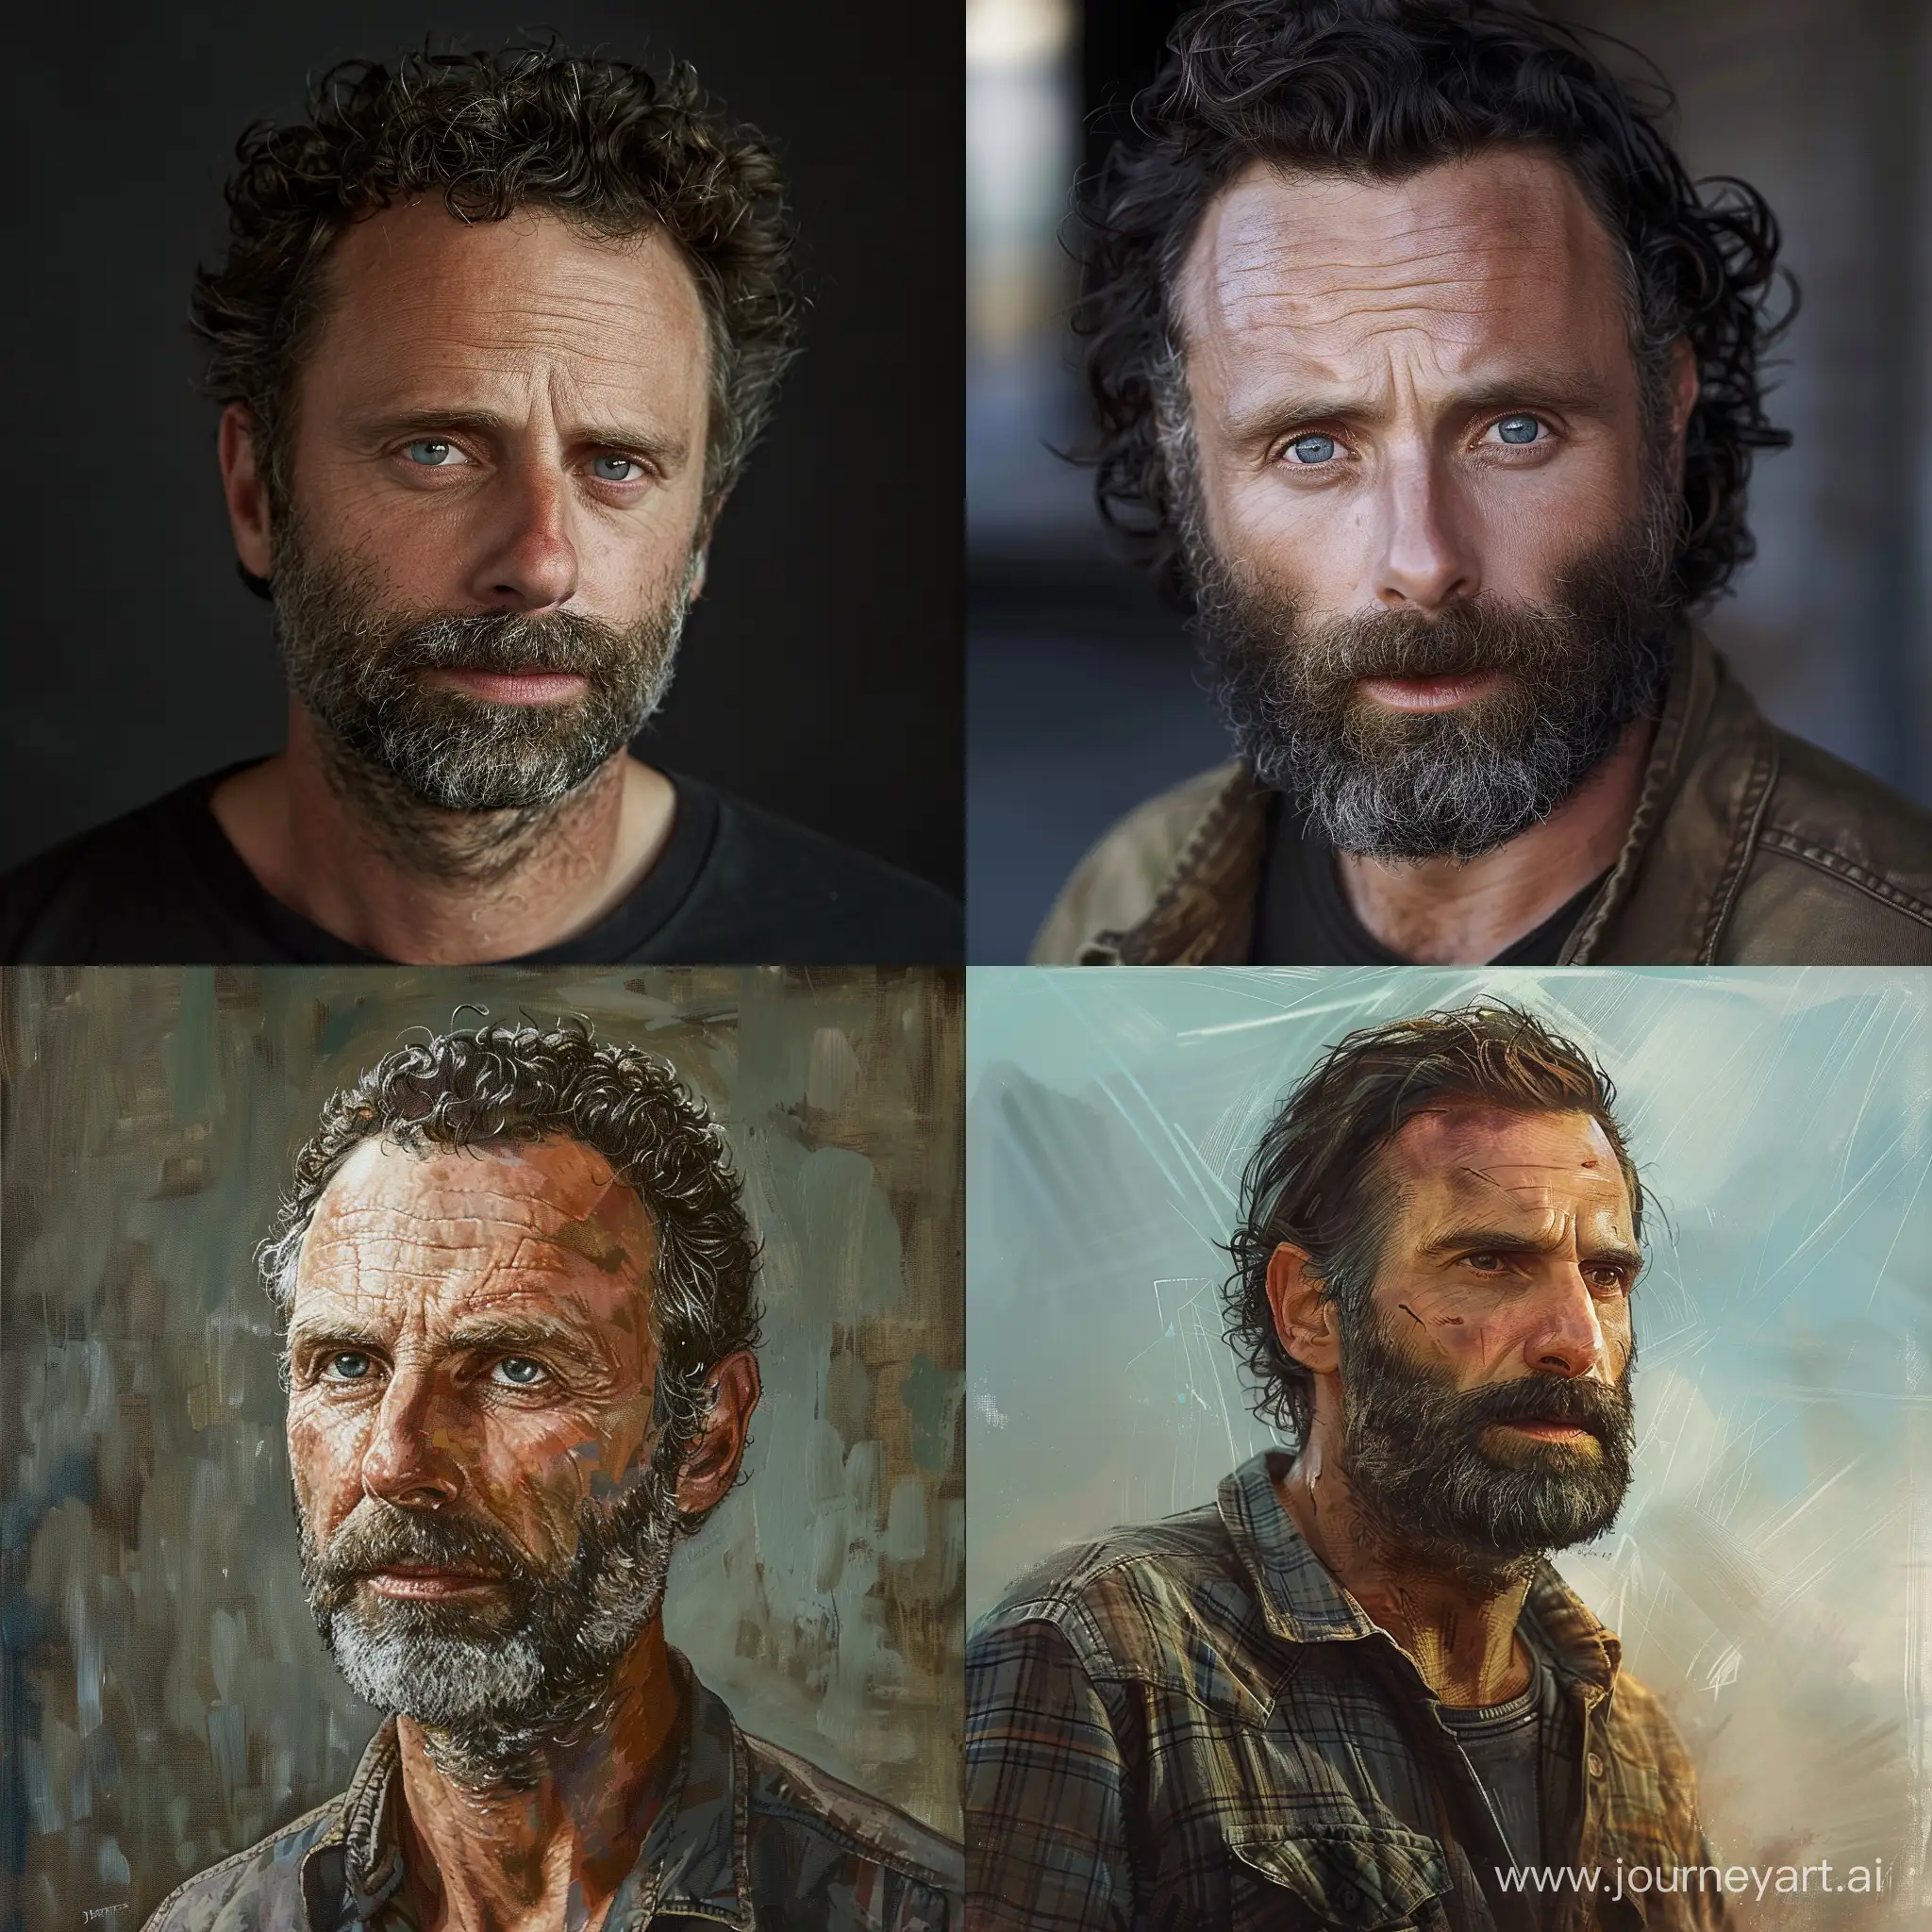 Rick-Grimes-with-Intense-Gaze-in-Apocalyptic-Setting